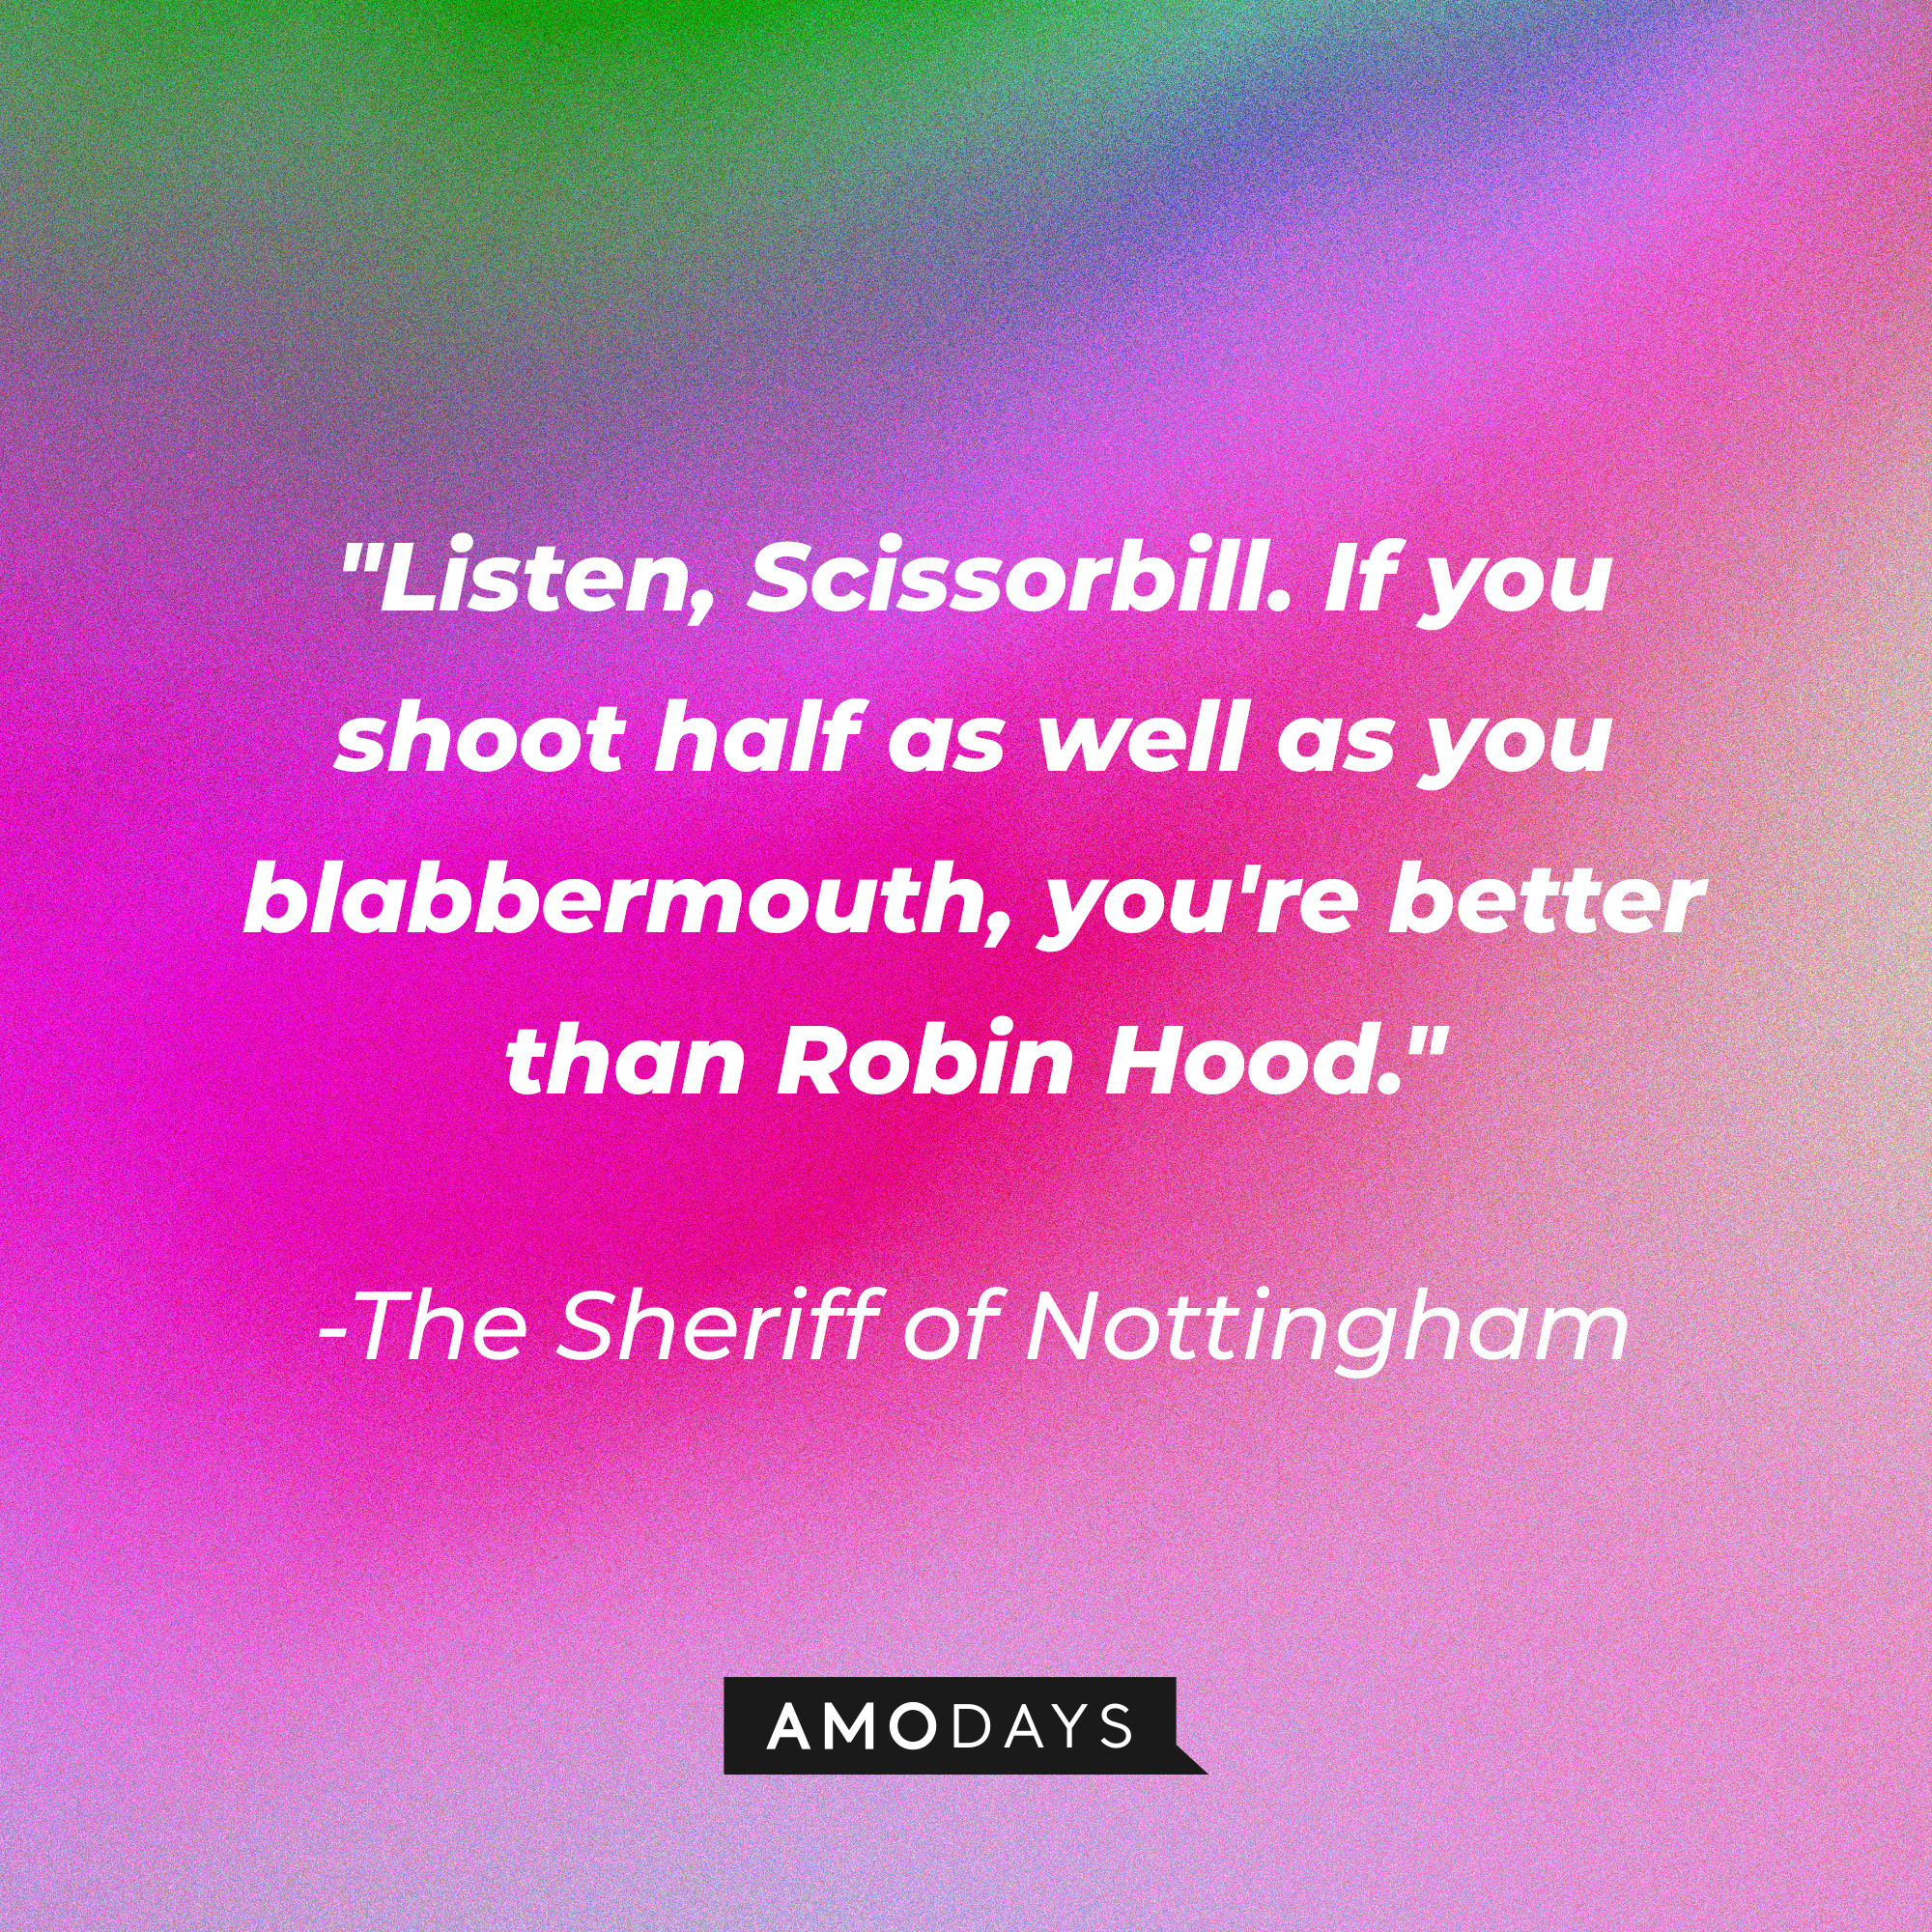 The Sheriff of Nottingham's quote: "Listen, Scissorbill. If you shoot half as well as you blabbermouth, you're better than Robin Hood." | Source: Amodays